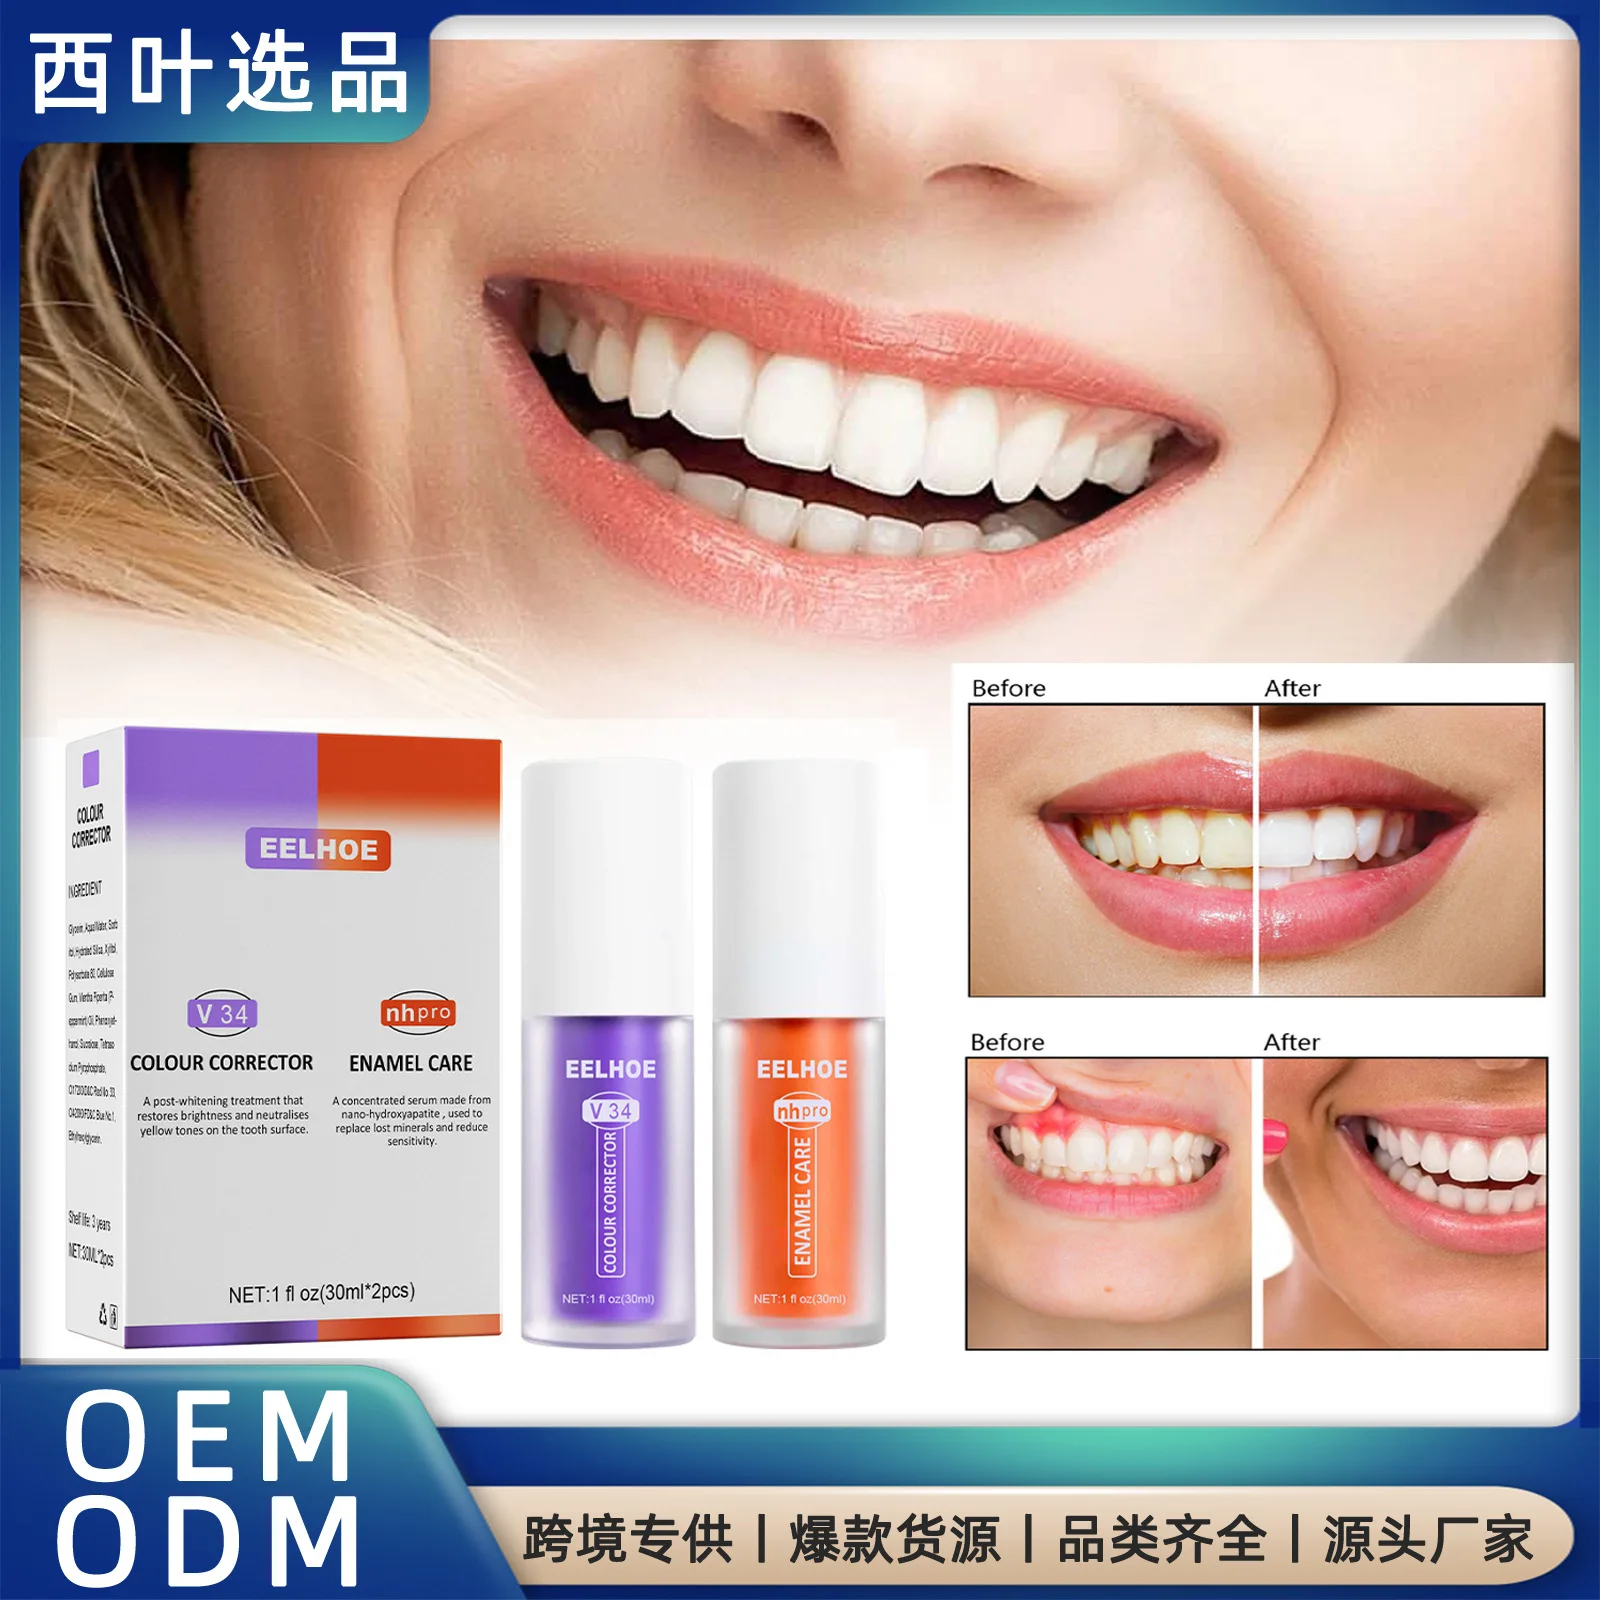 

Toothpaste Purple Orange Toothpaste Repairs Teeth, Cleans Mouth, Brightly Cleans Stains, Prevents Cavity, Whitens Teeth